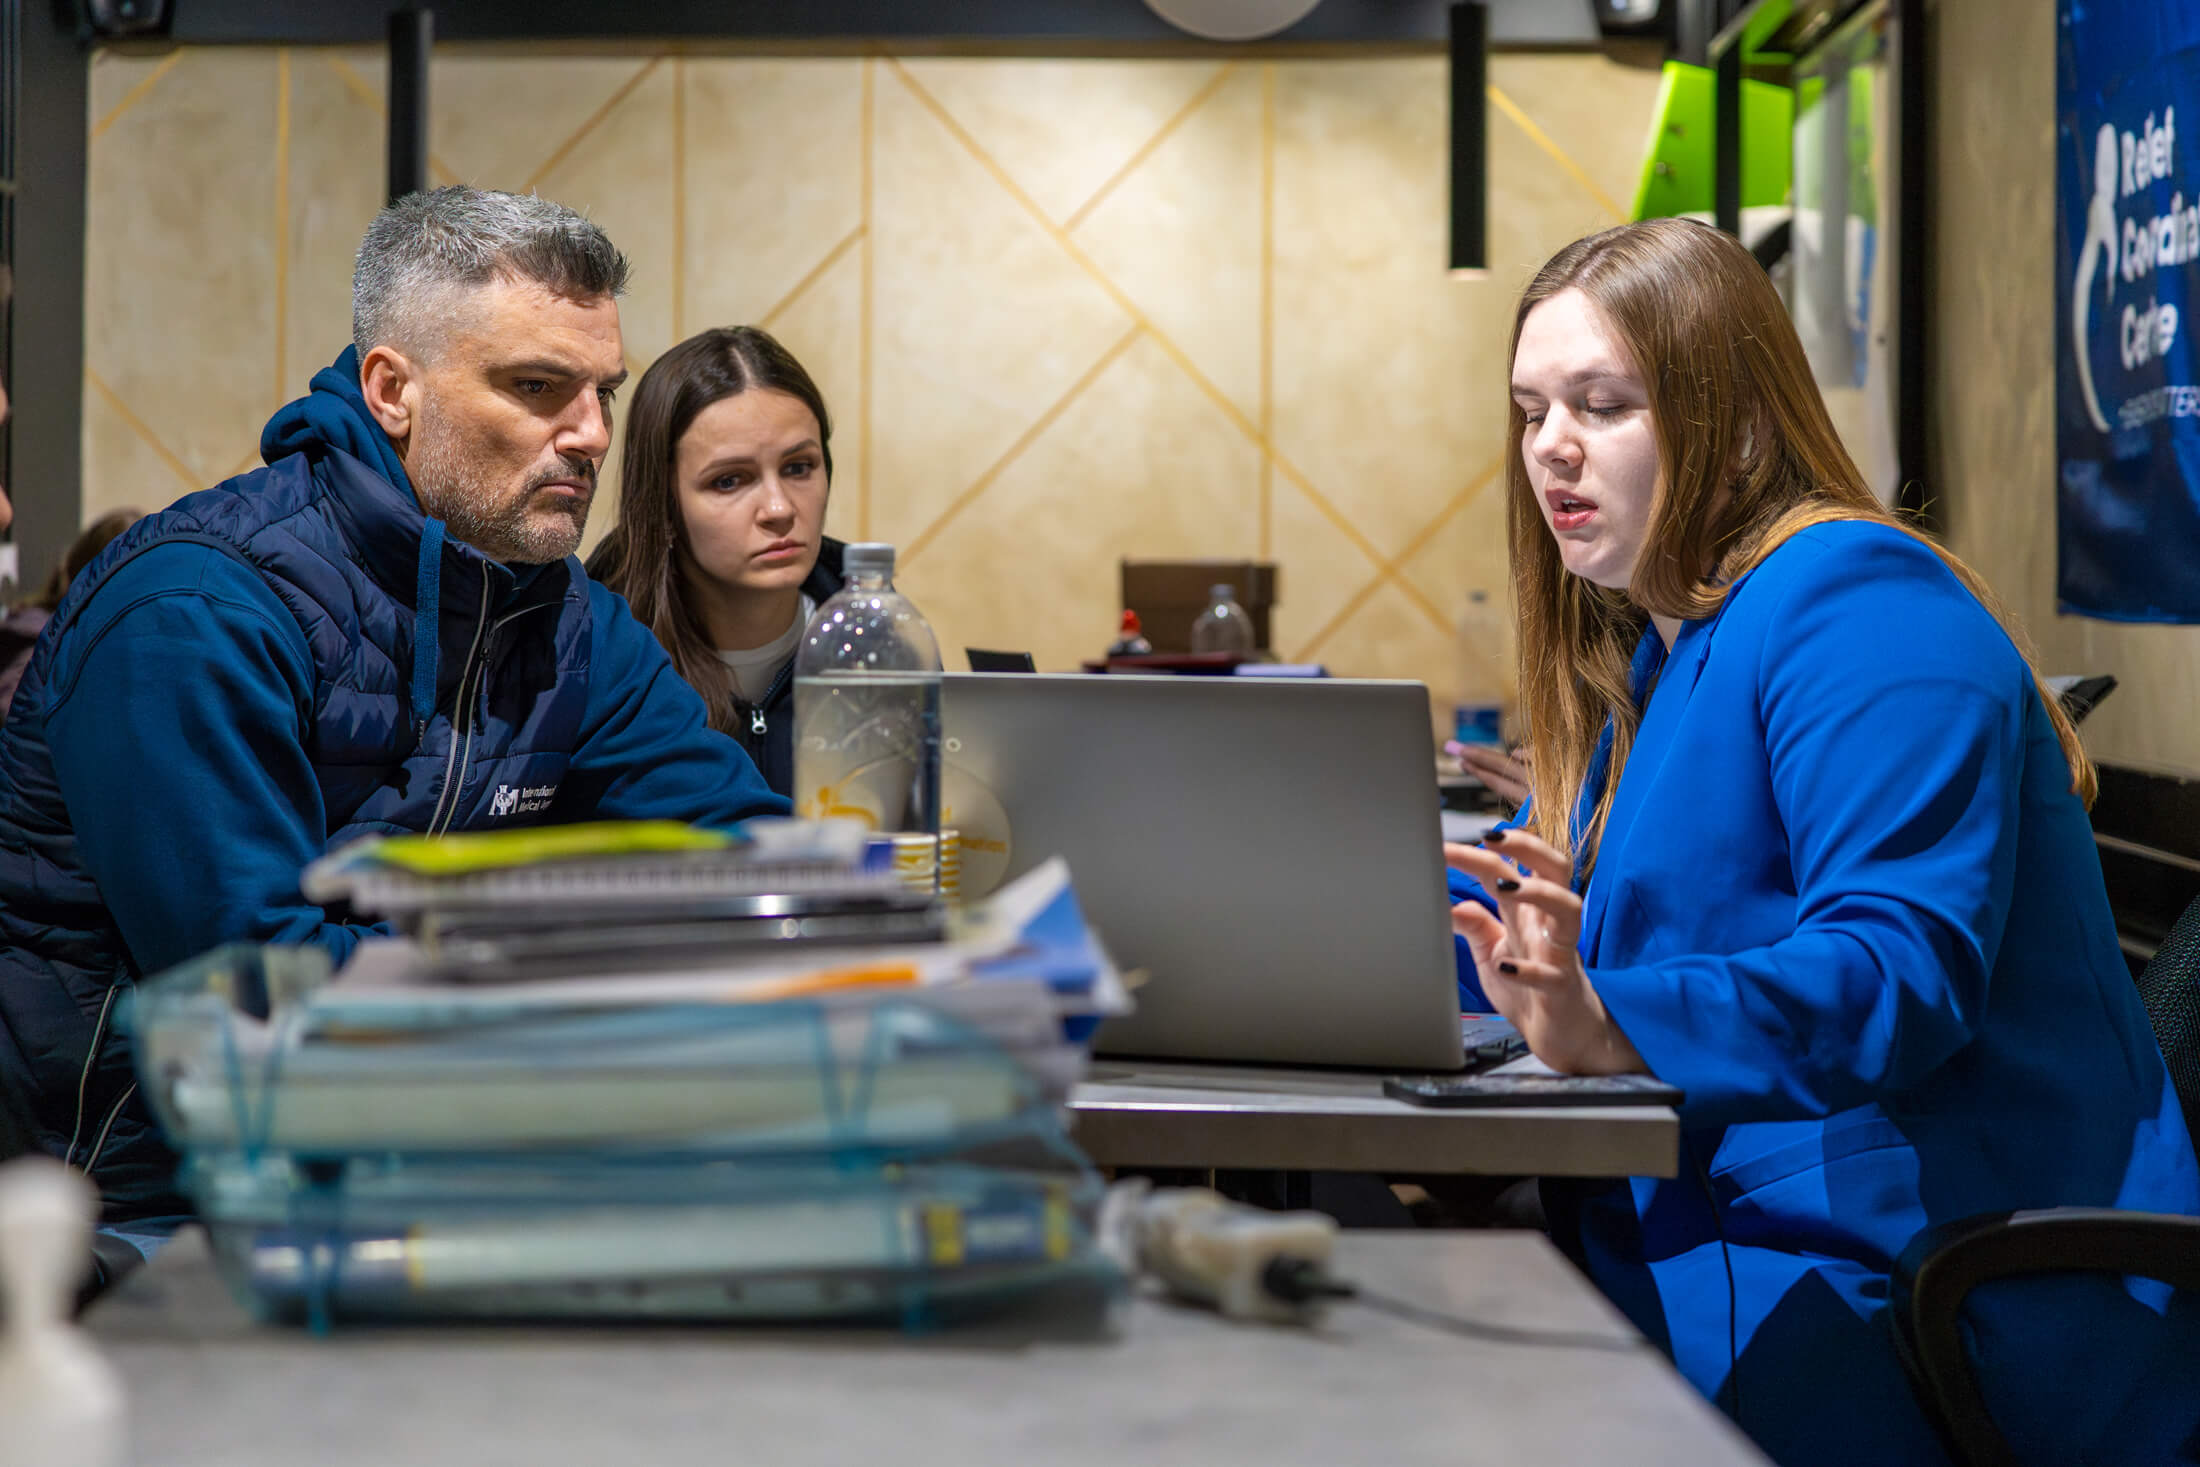 Ukraine Country Director Matthew Stearns (left) and other International Medical Corps staff meet with staff from the Relief Coordination Center to coordinate our response to the displacement crisis in Kharkiv.